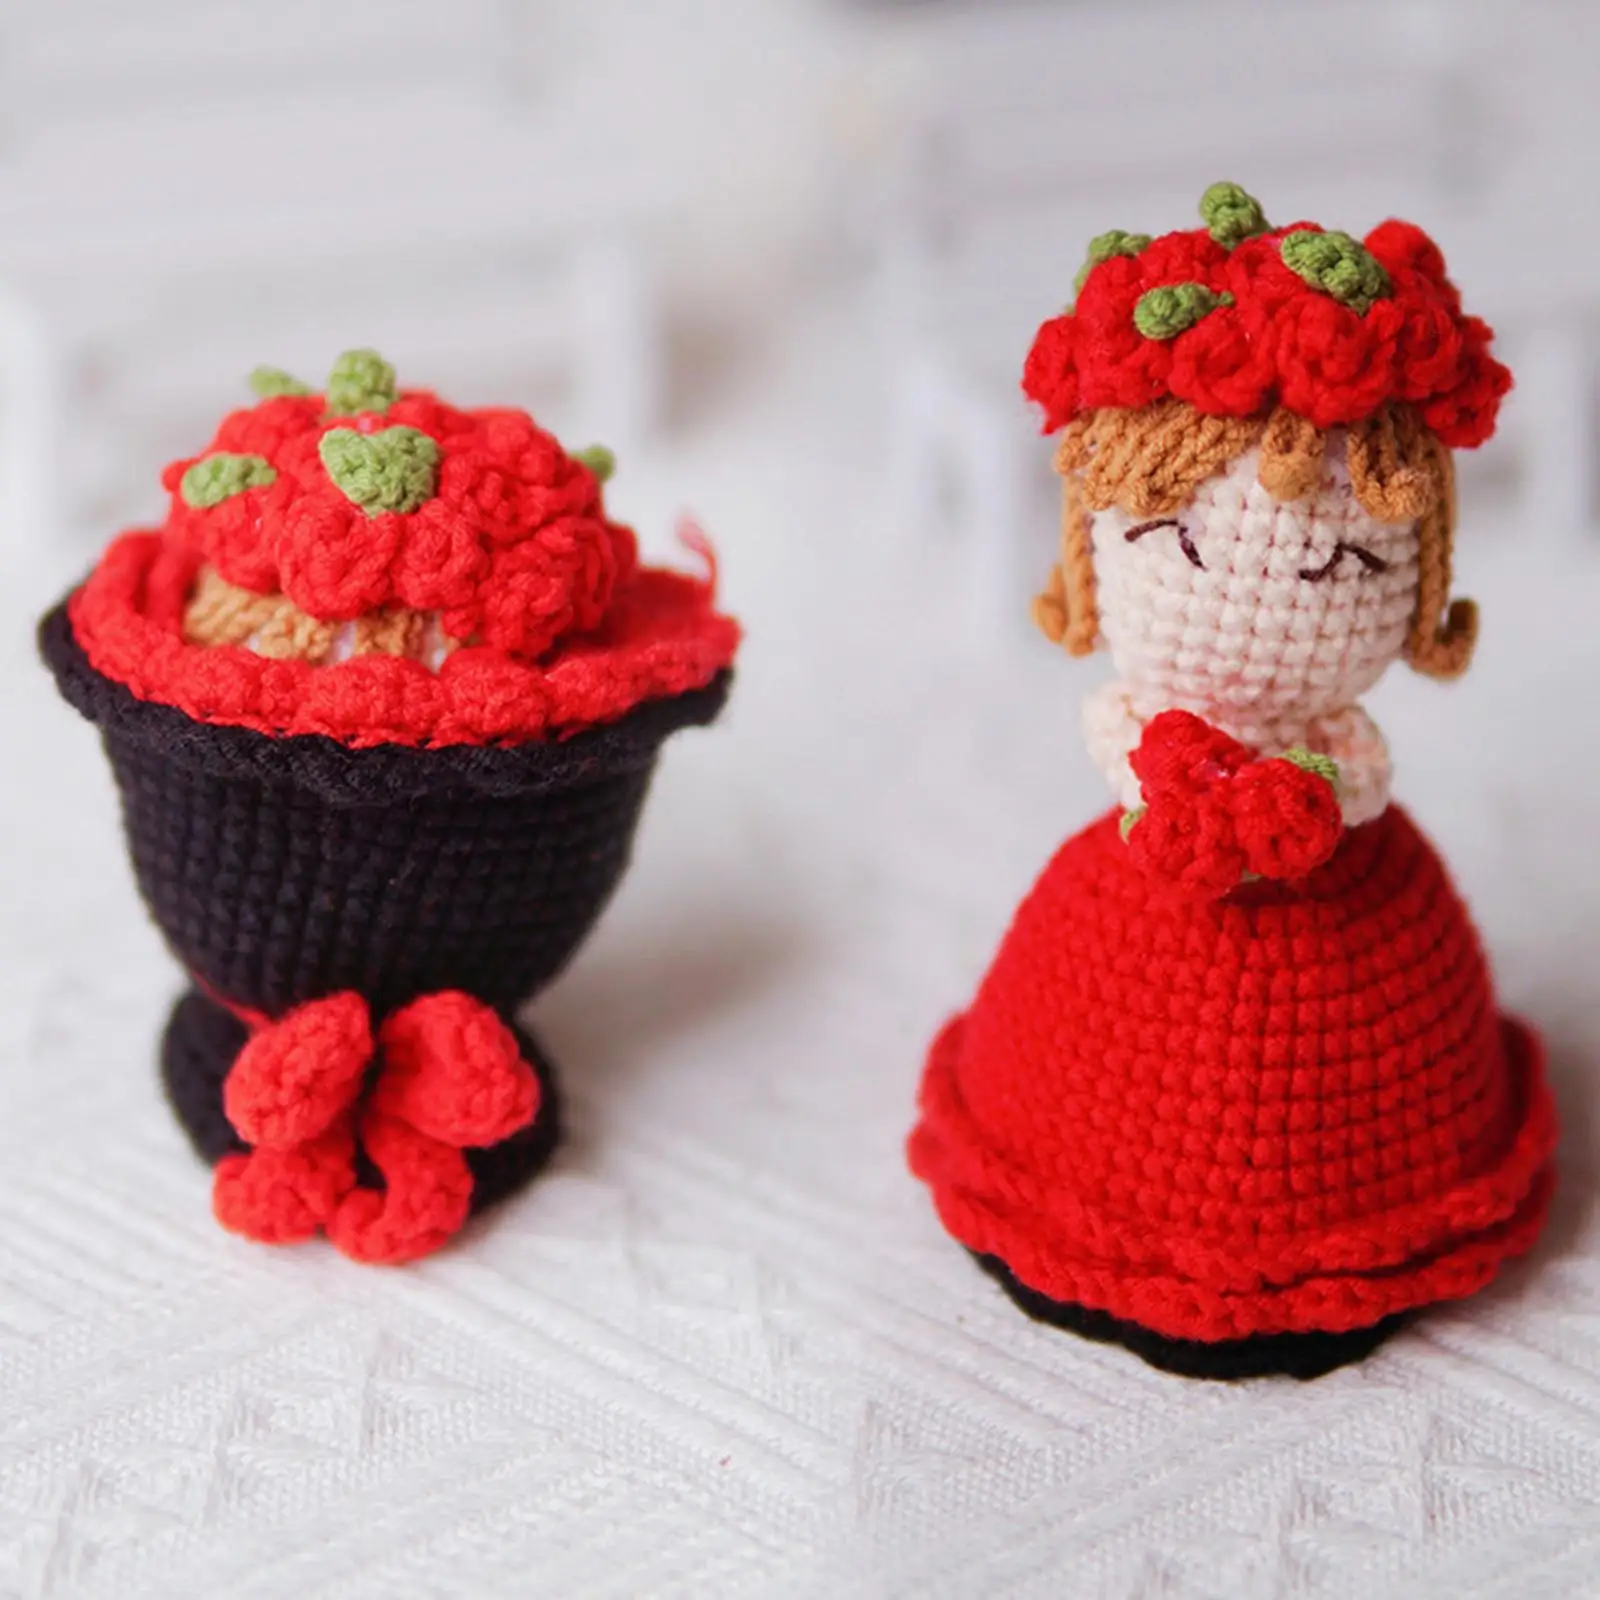 Lovely Soft Knit Toy Table Centerpieces Crochet Stuffed Bride Doll Knitted Crochet Bouquet for Women Girlfriend Birthday Gifts